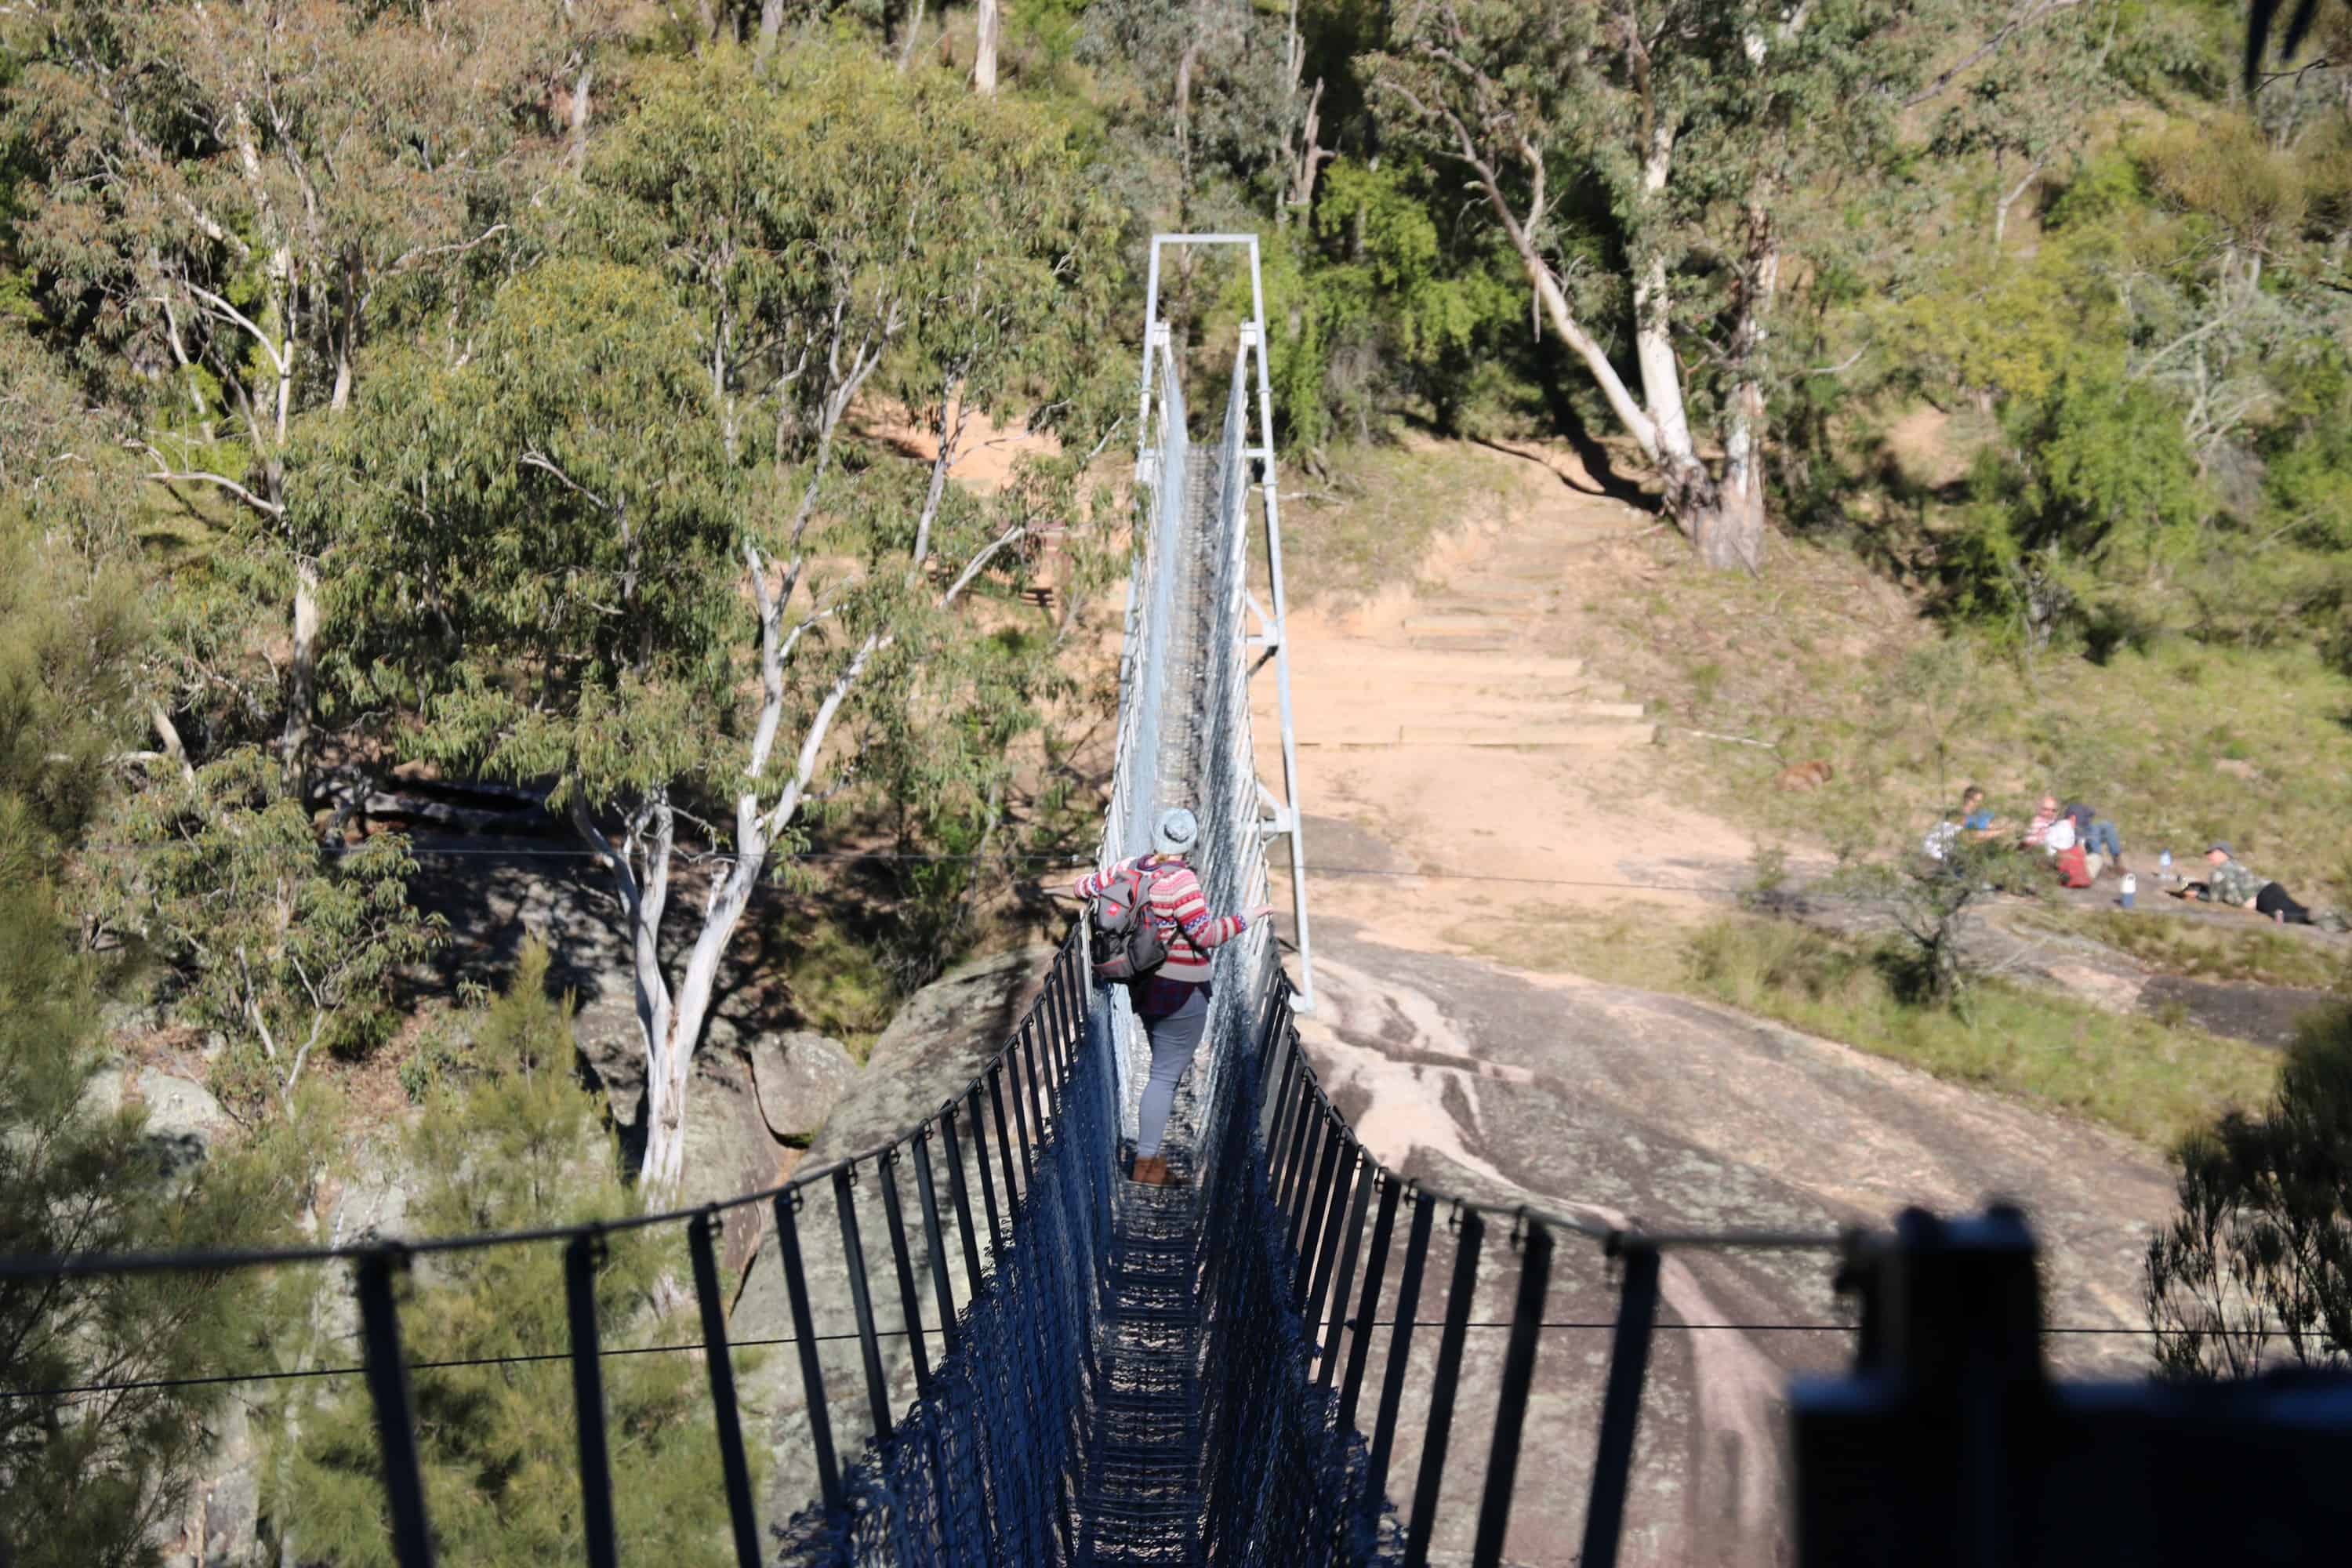 Emma stands on a very narrow metal suspension bridge that extends above the Cox's River